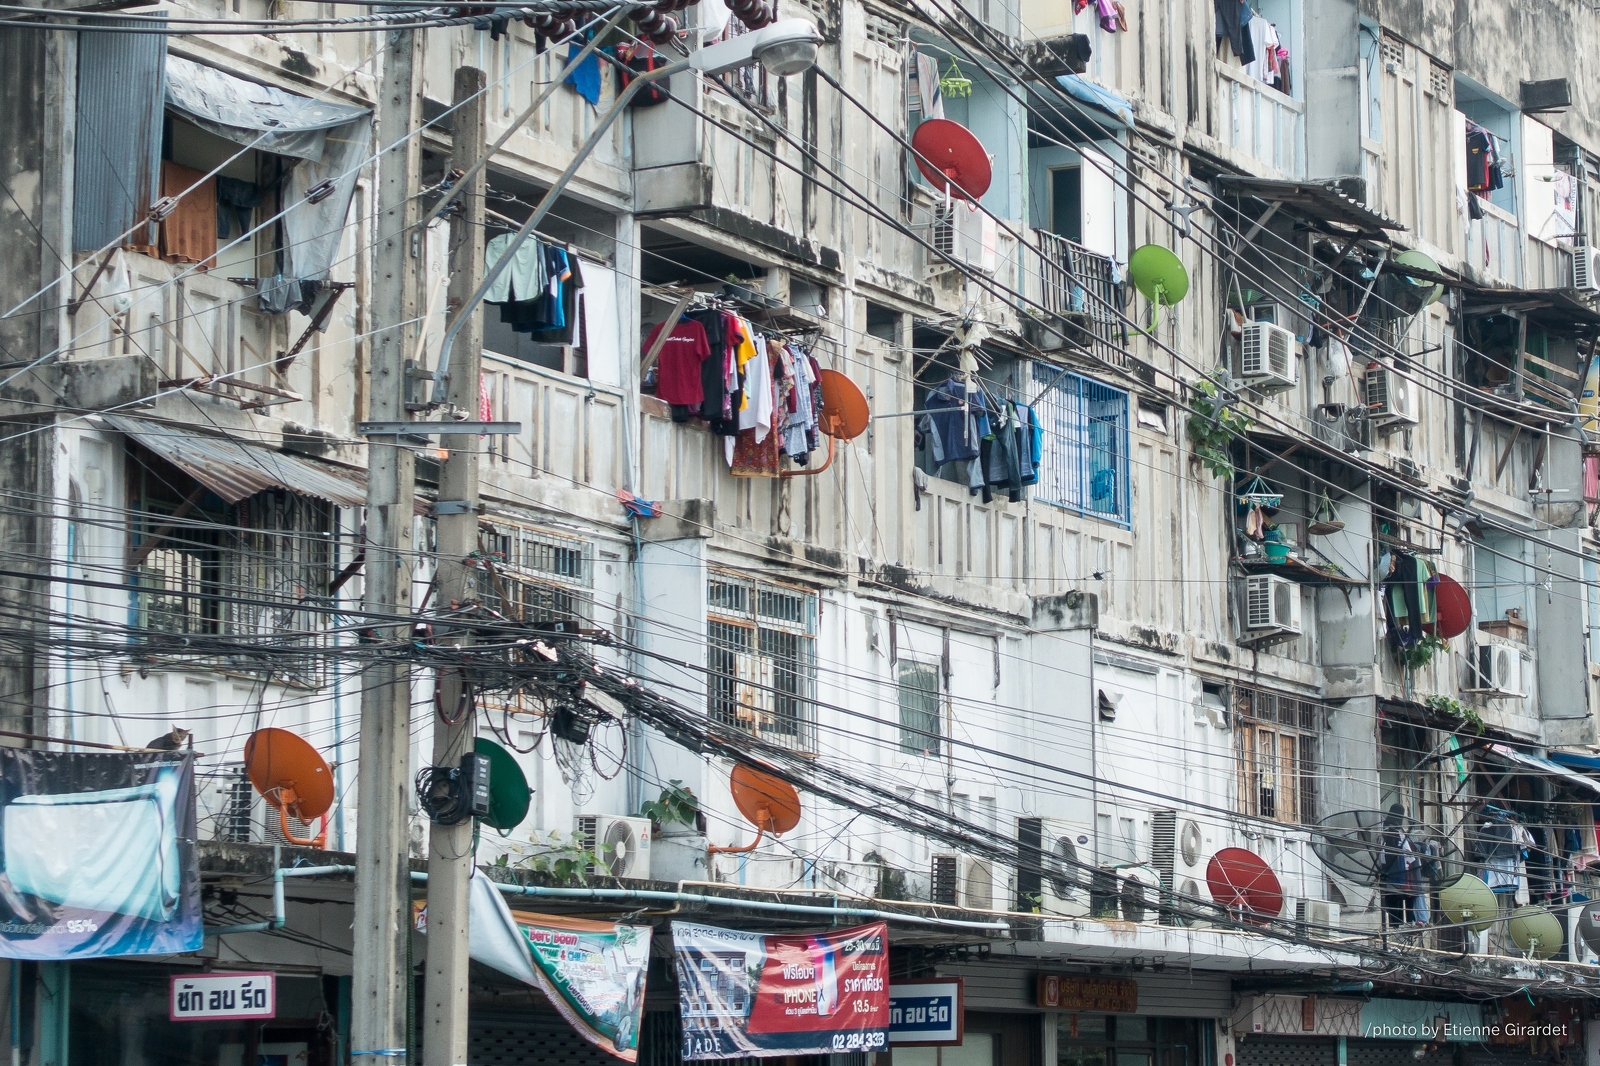 201712_16_DSC03576-house-cables-clotheslines-bangkok-by-E-Girardet.jpg